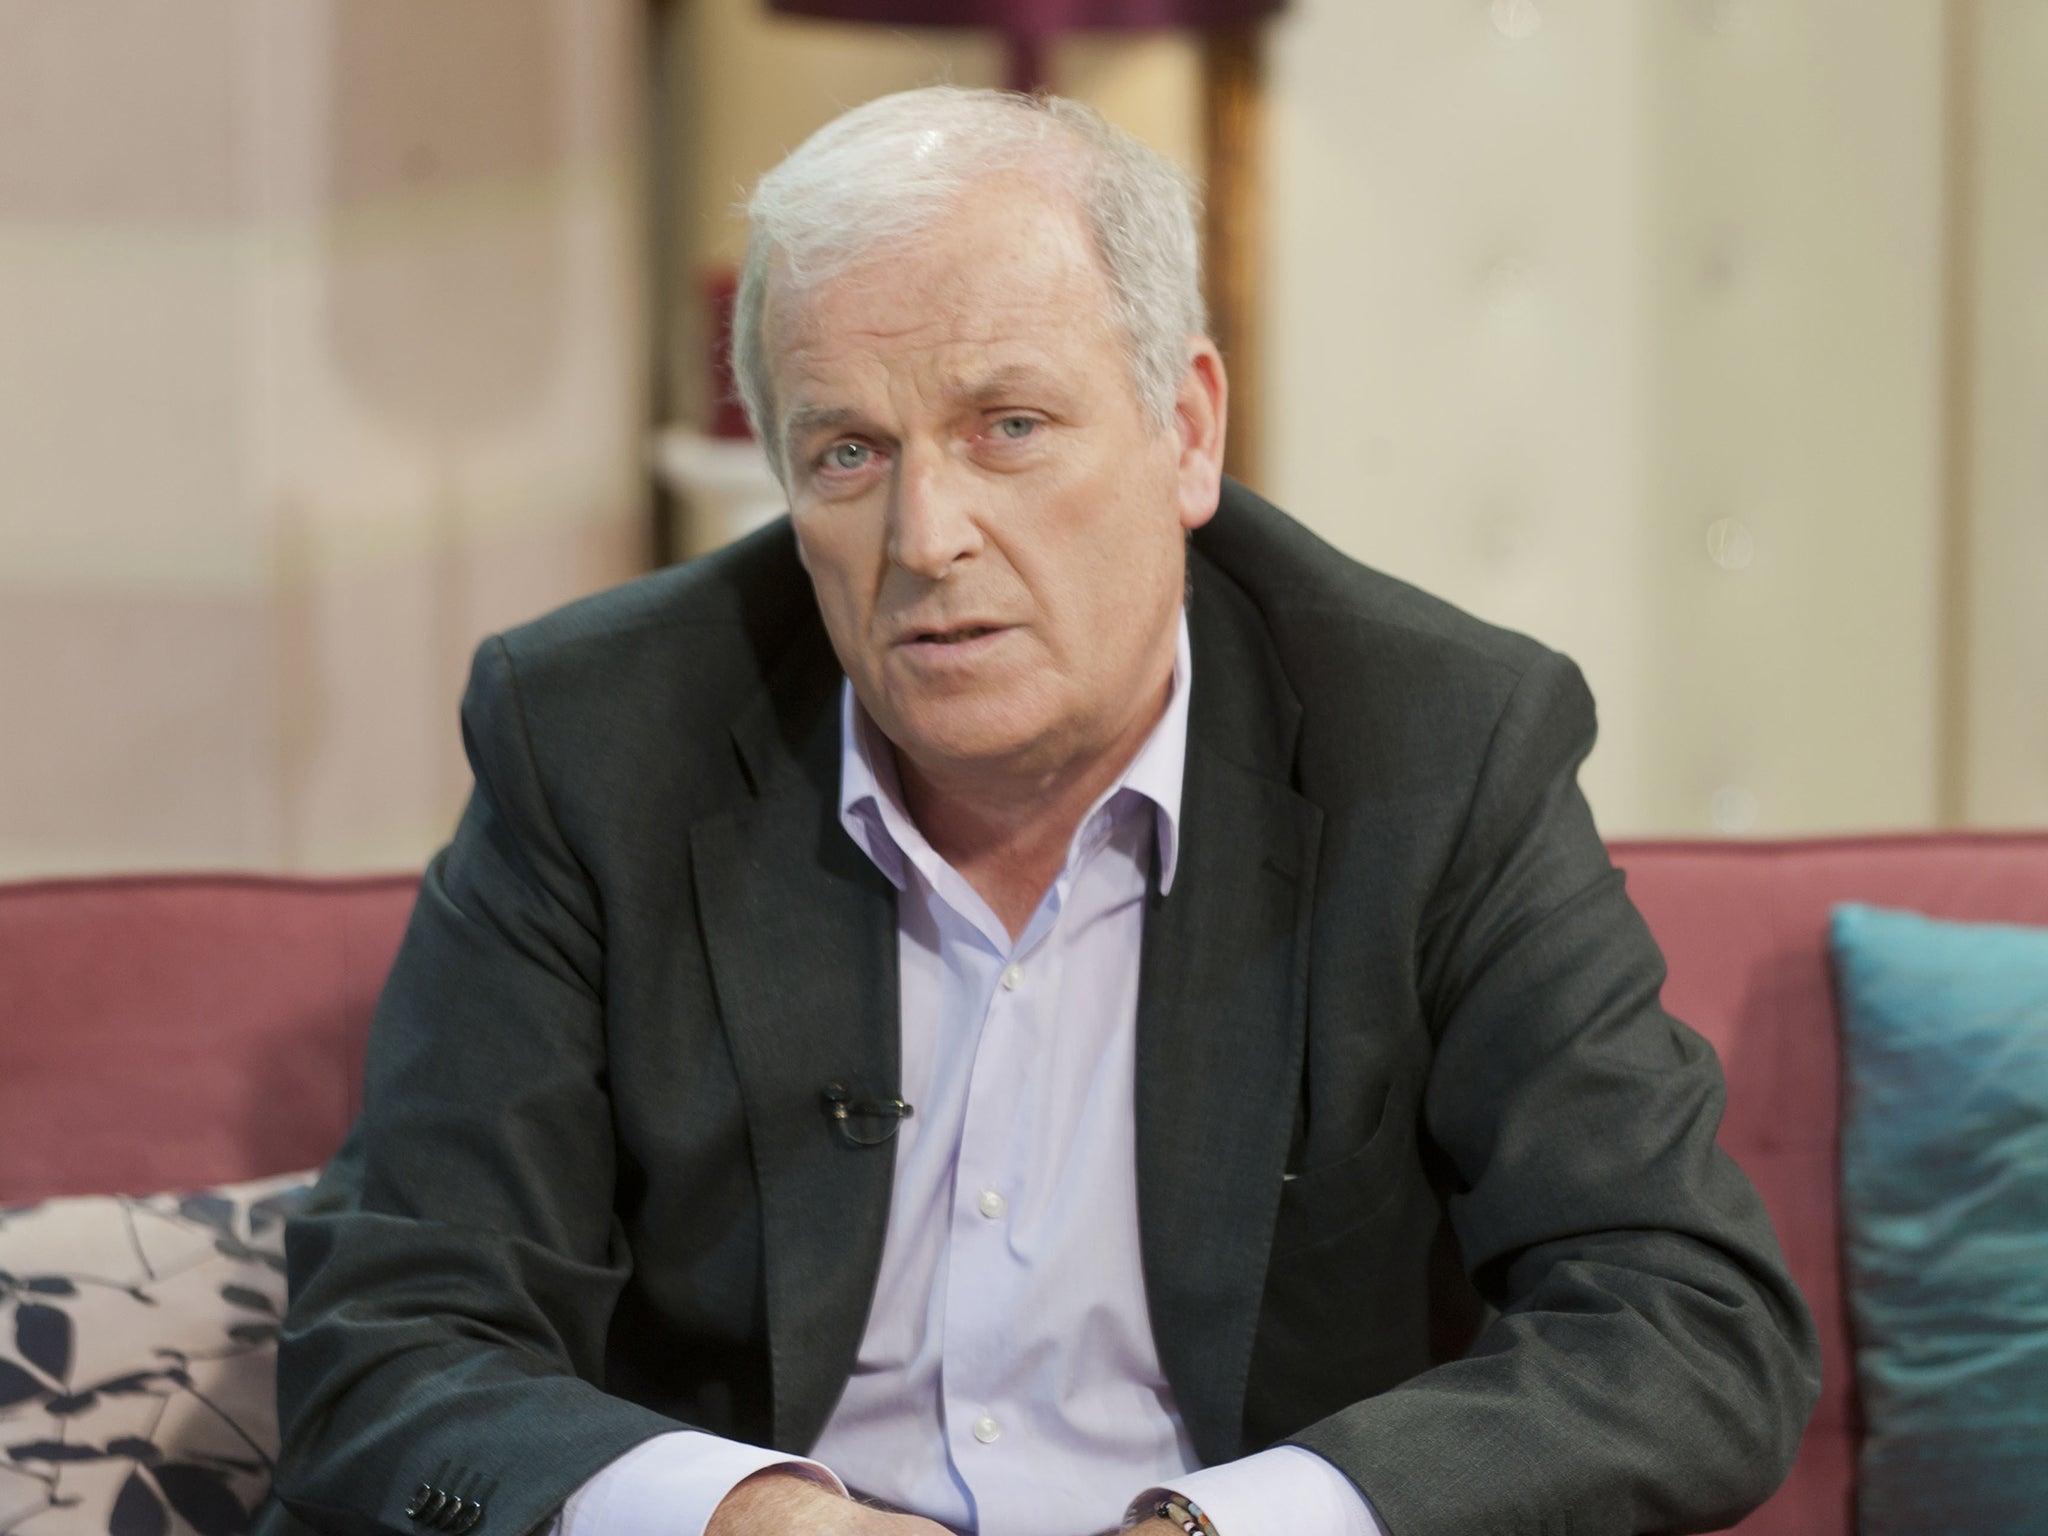 The Sun suspended Kelvin MacKenzie after critics accused him of racism